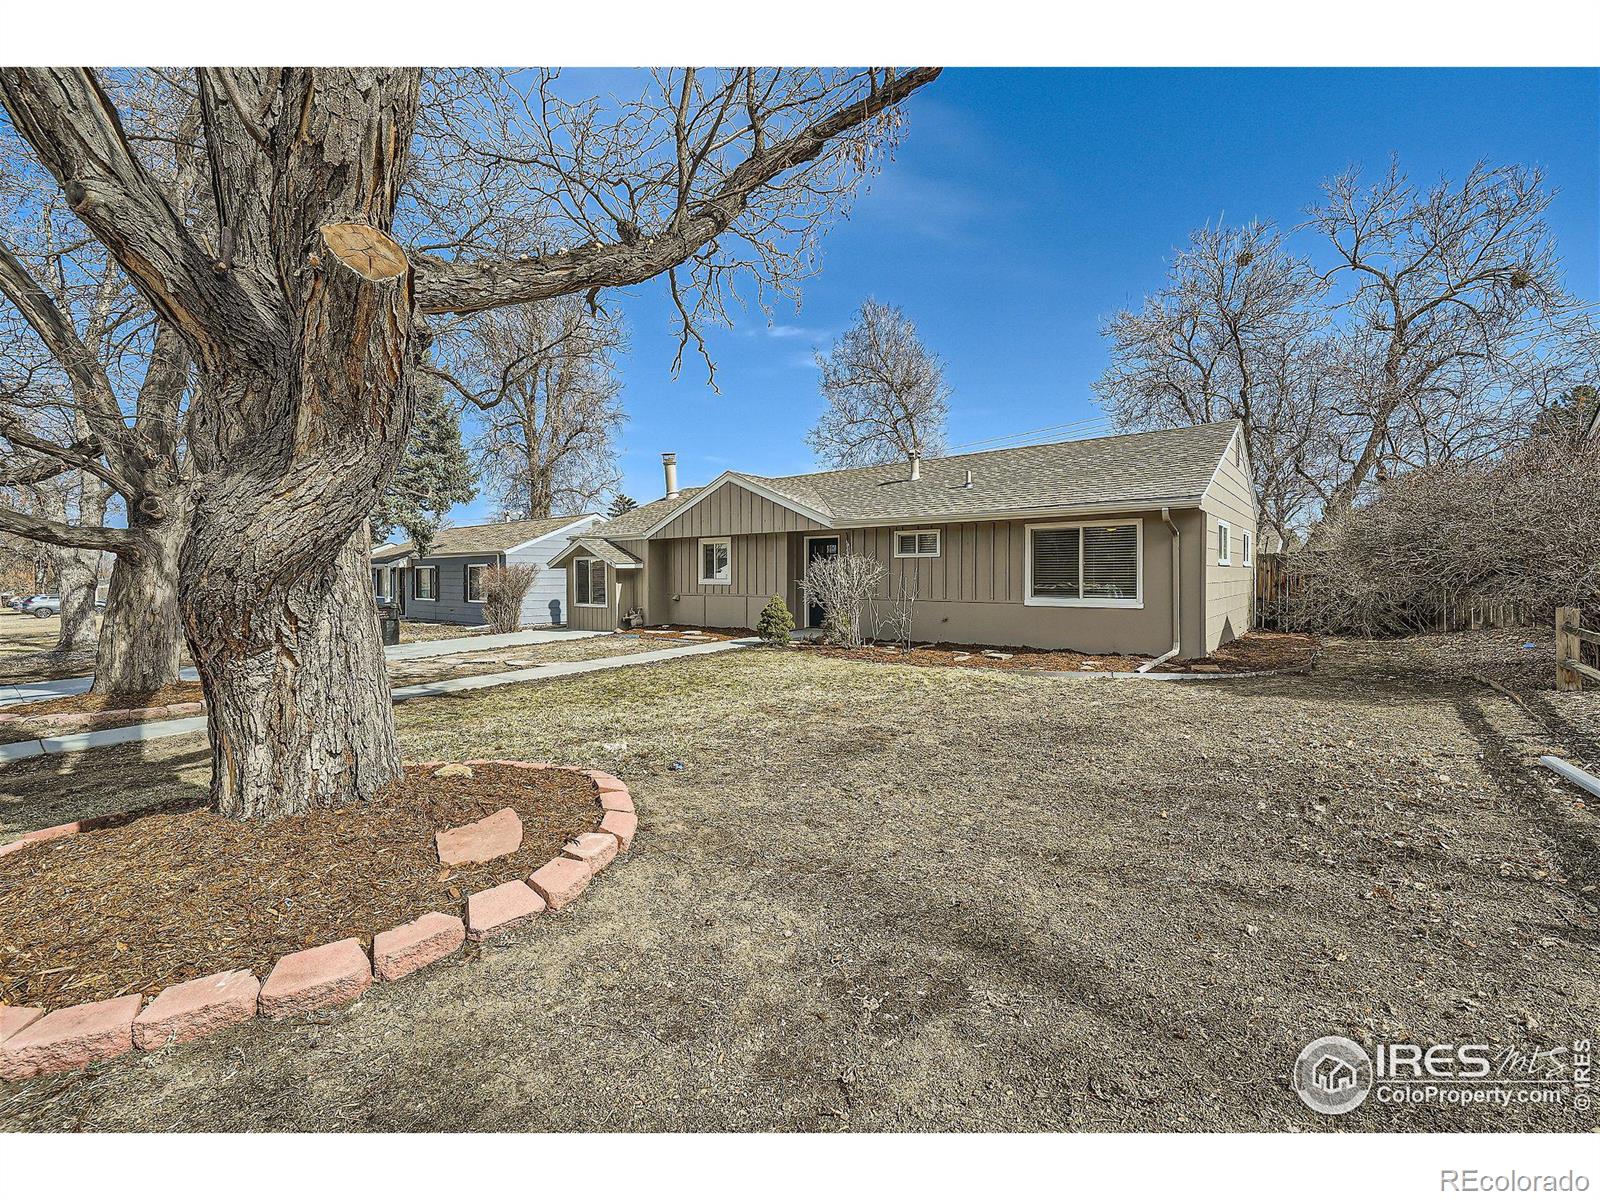 3384 s fairfax street, denver sold home. Closed on 2024-05-07 for $490,500.